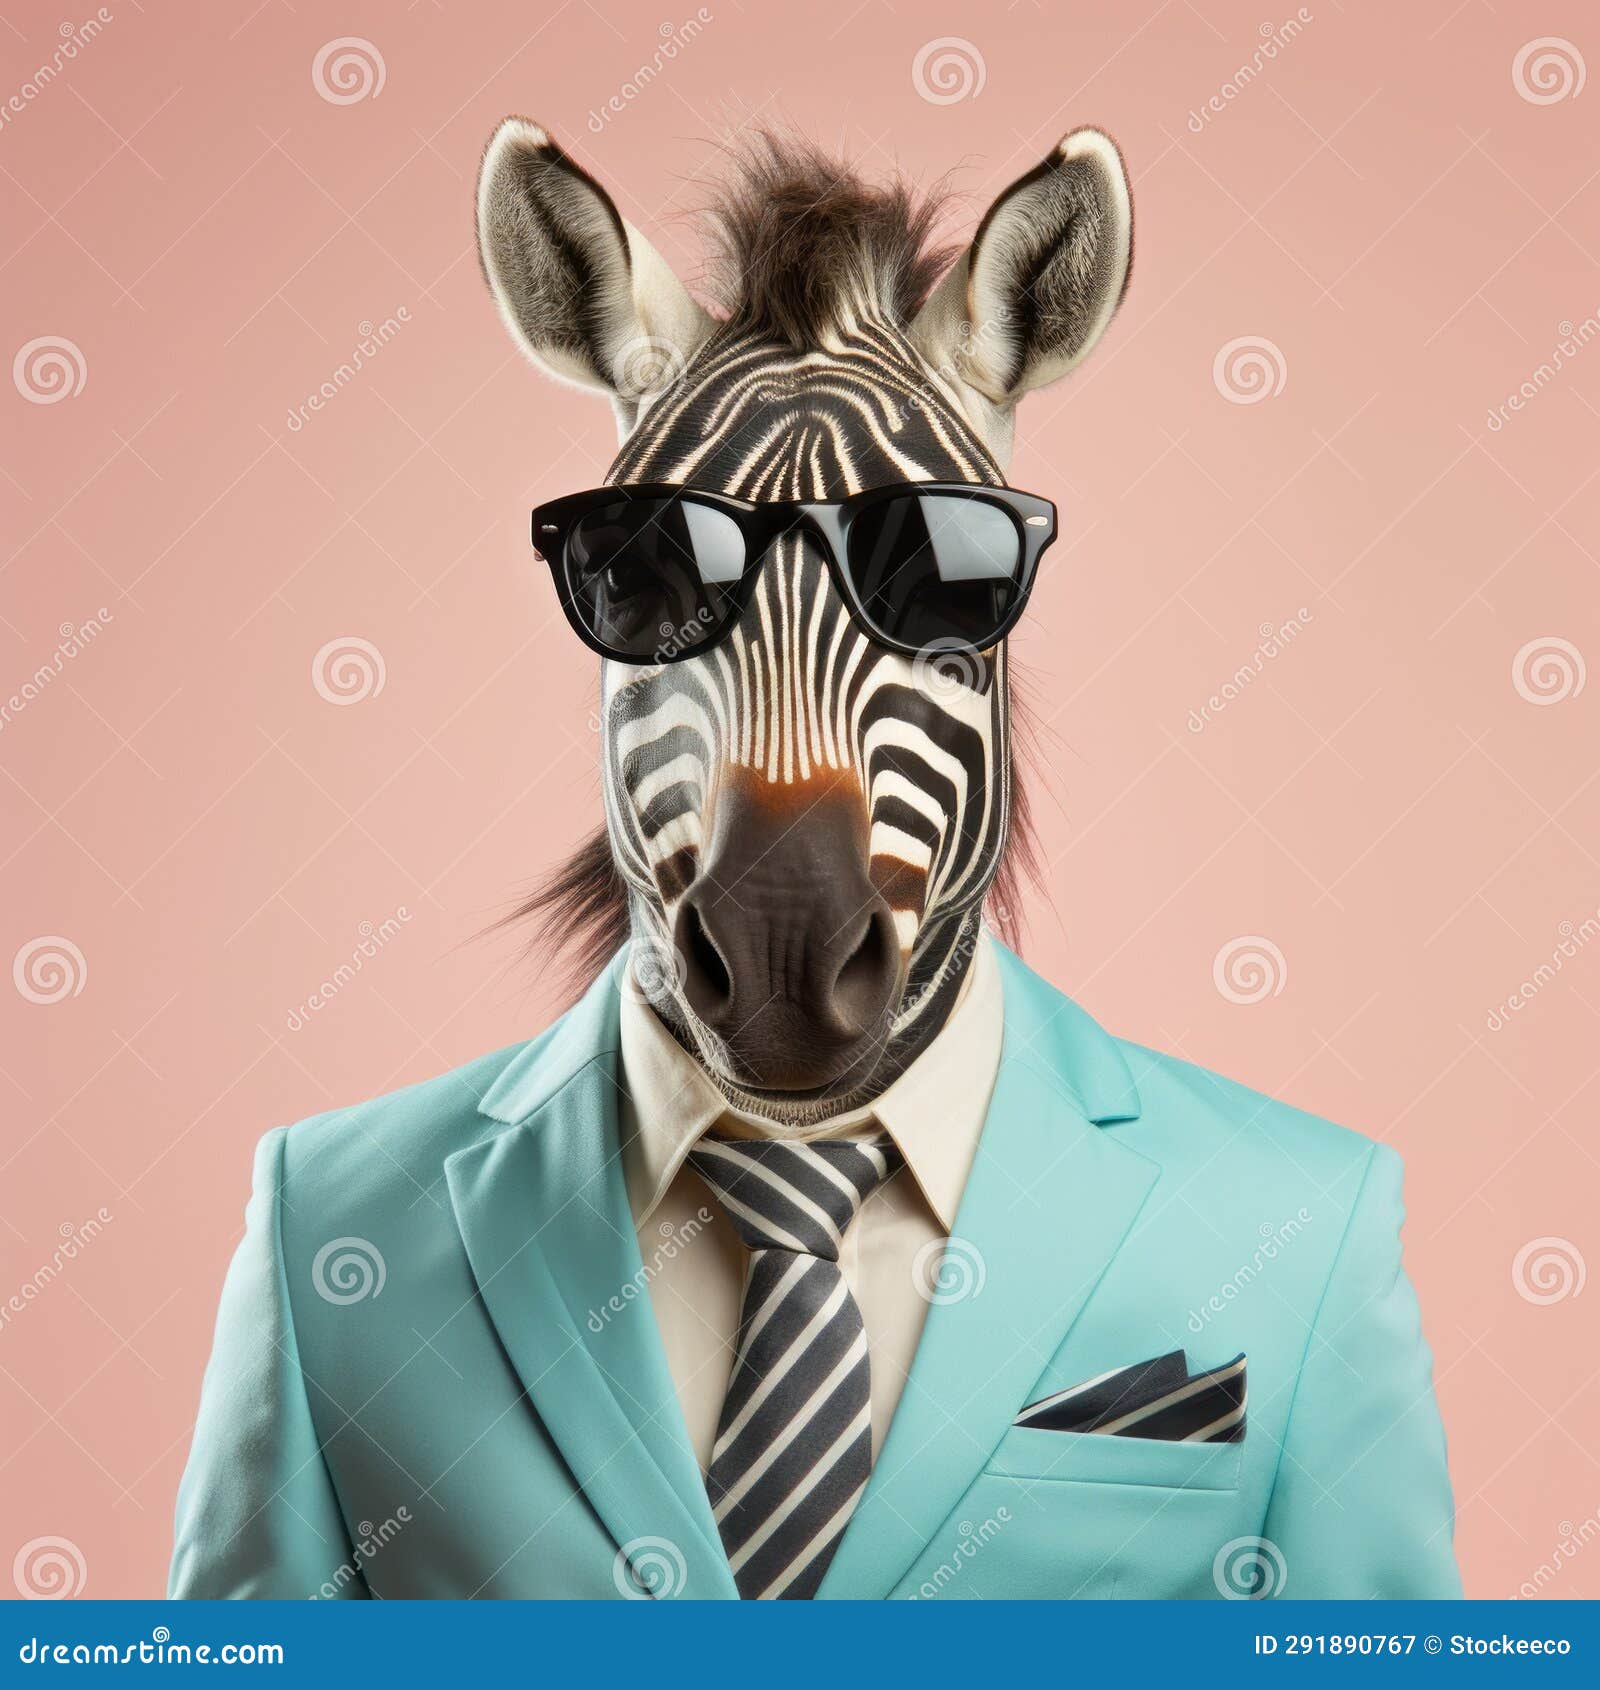 bold and retro: zebra in a stylish green suit and shades